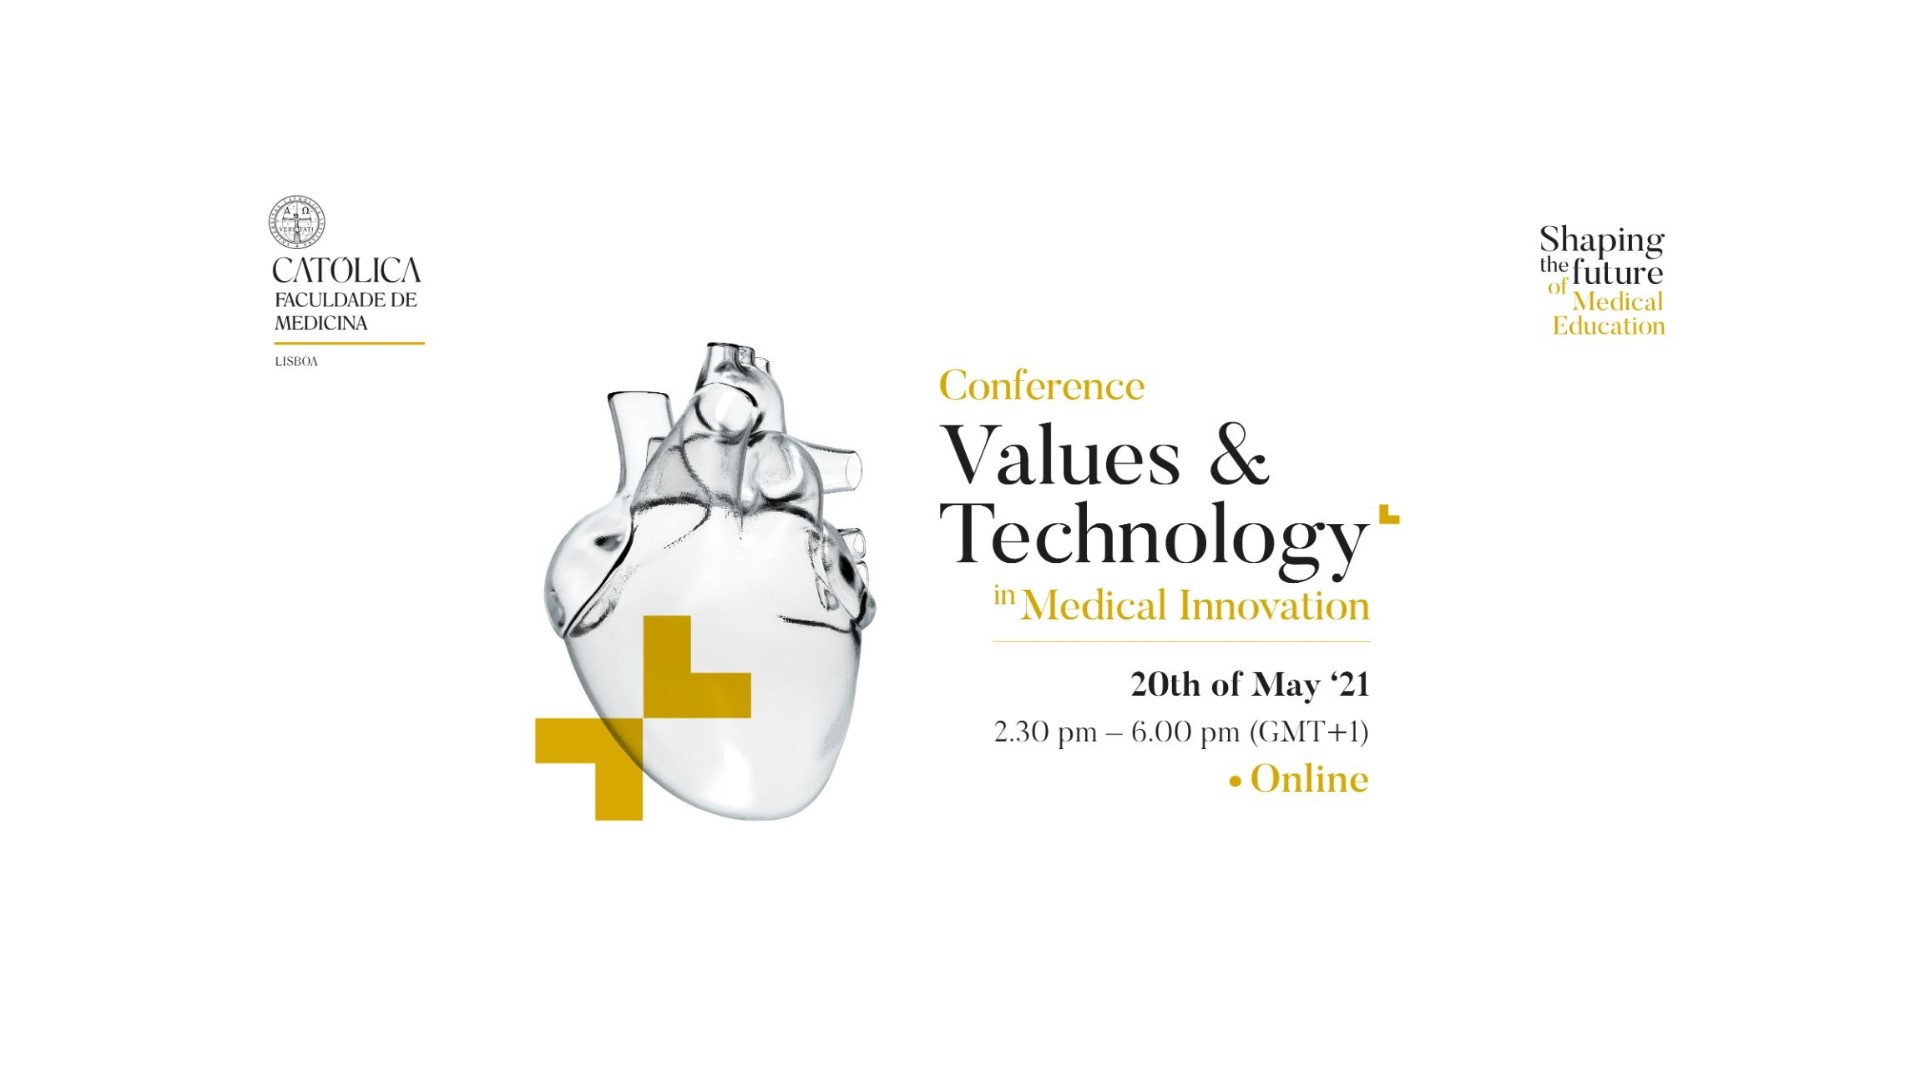 Values and Technology